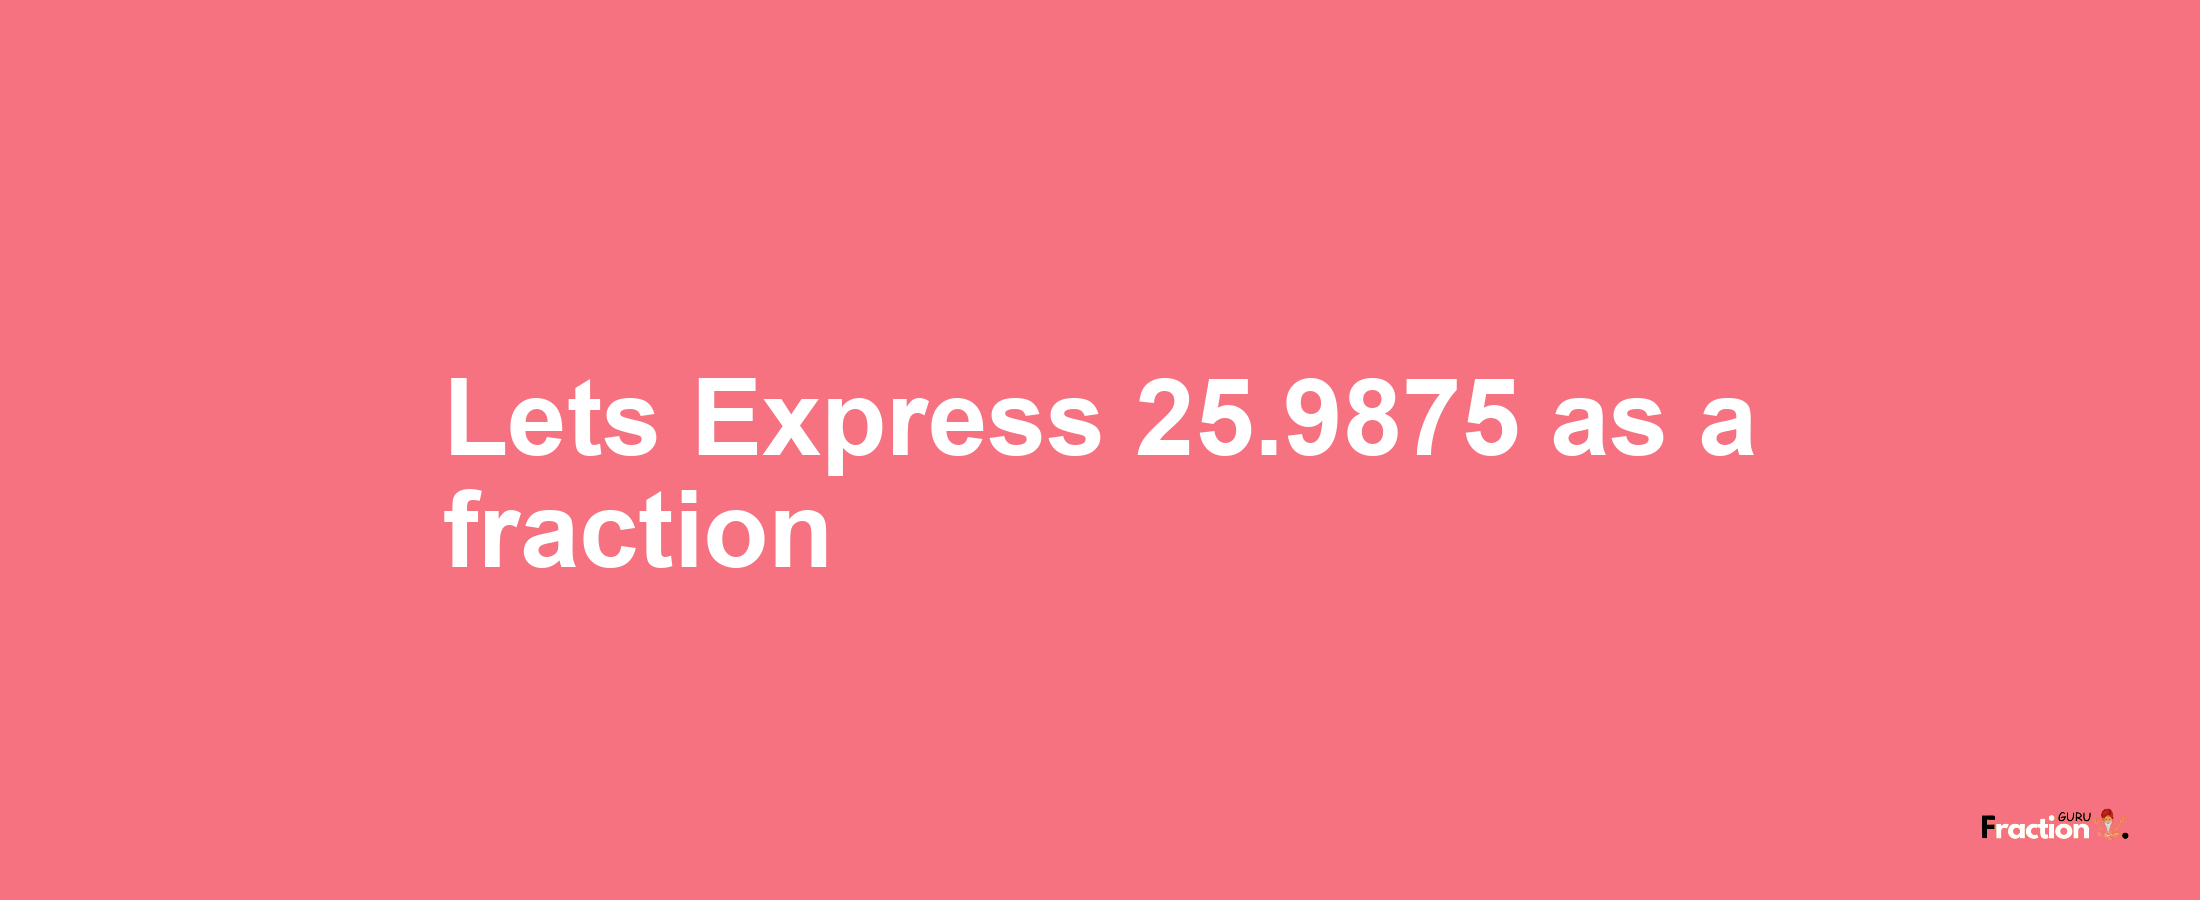 Lets Express 25.9875 as afraction